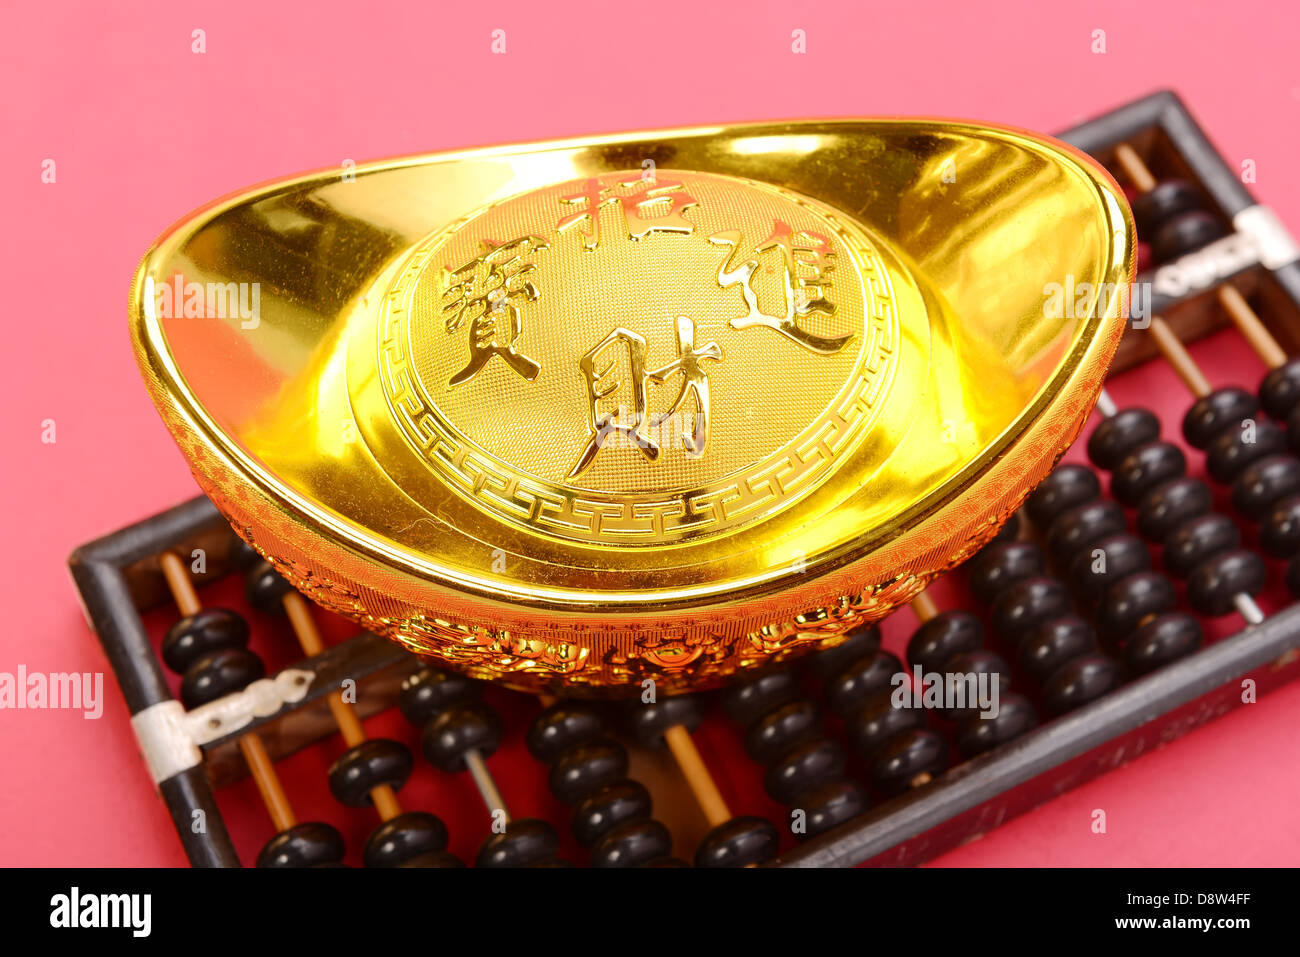 Chinese gold ingot and abacus mean symbols of wealth and prosperity. Stock Photo